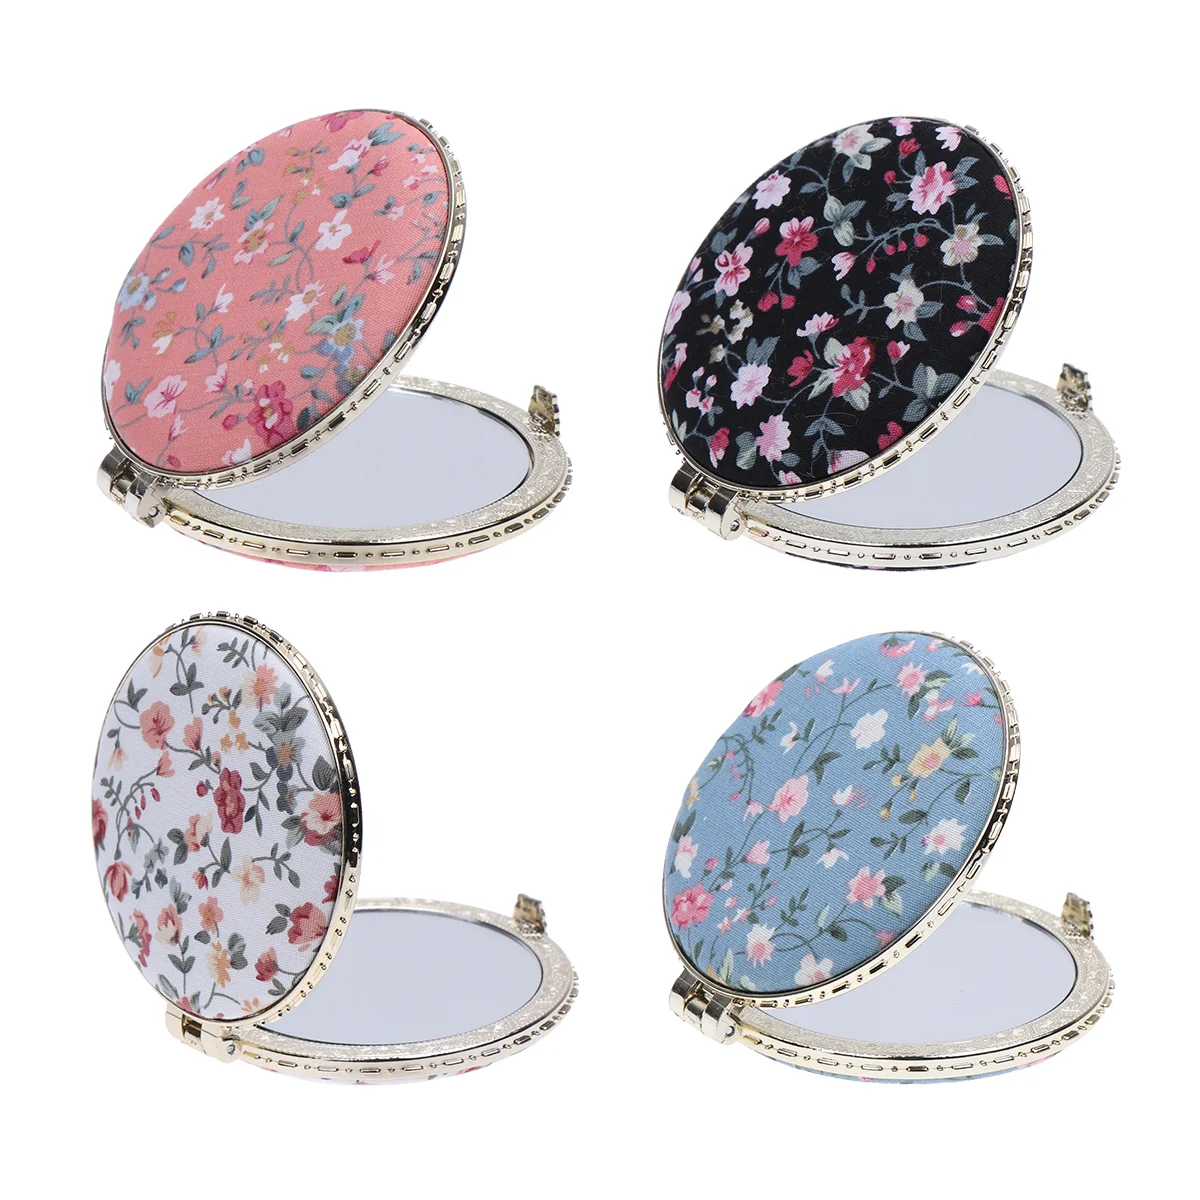 Portable Compact Makeup Mirror with Flower Printed Cover - Foldable Double-sided Metal Mirror for Travel and Everyday Use